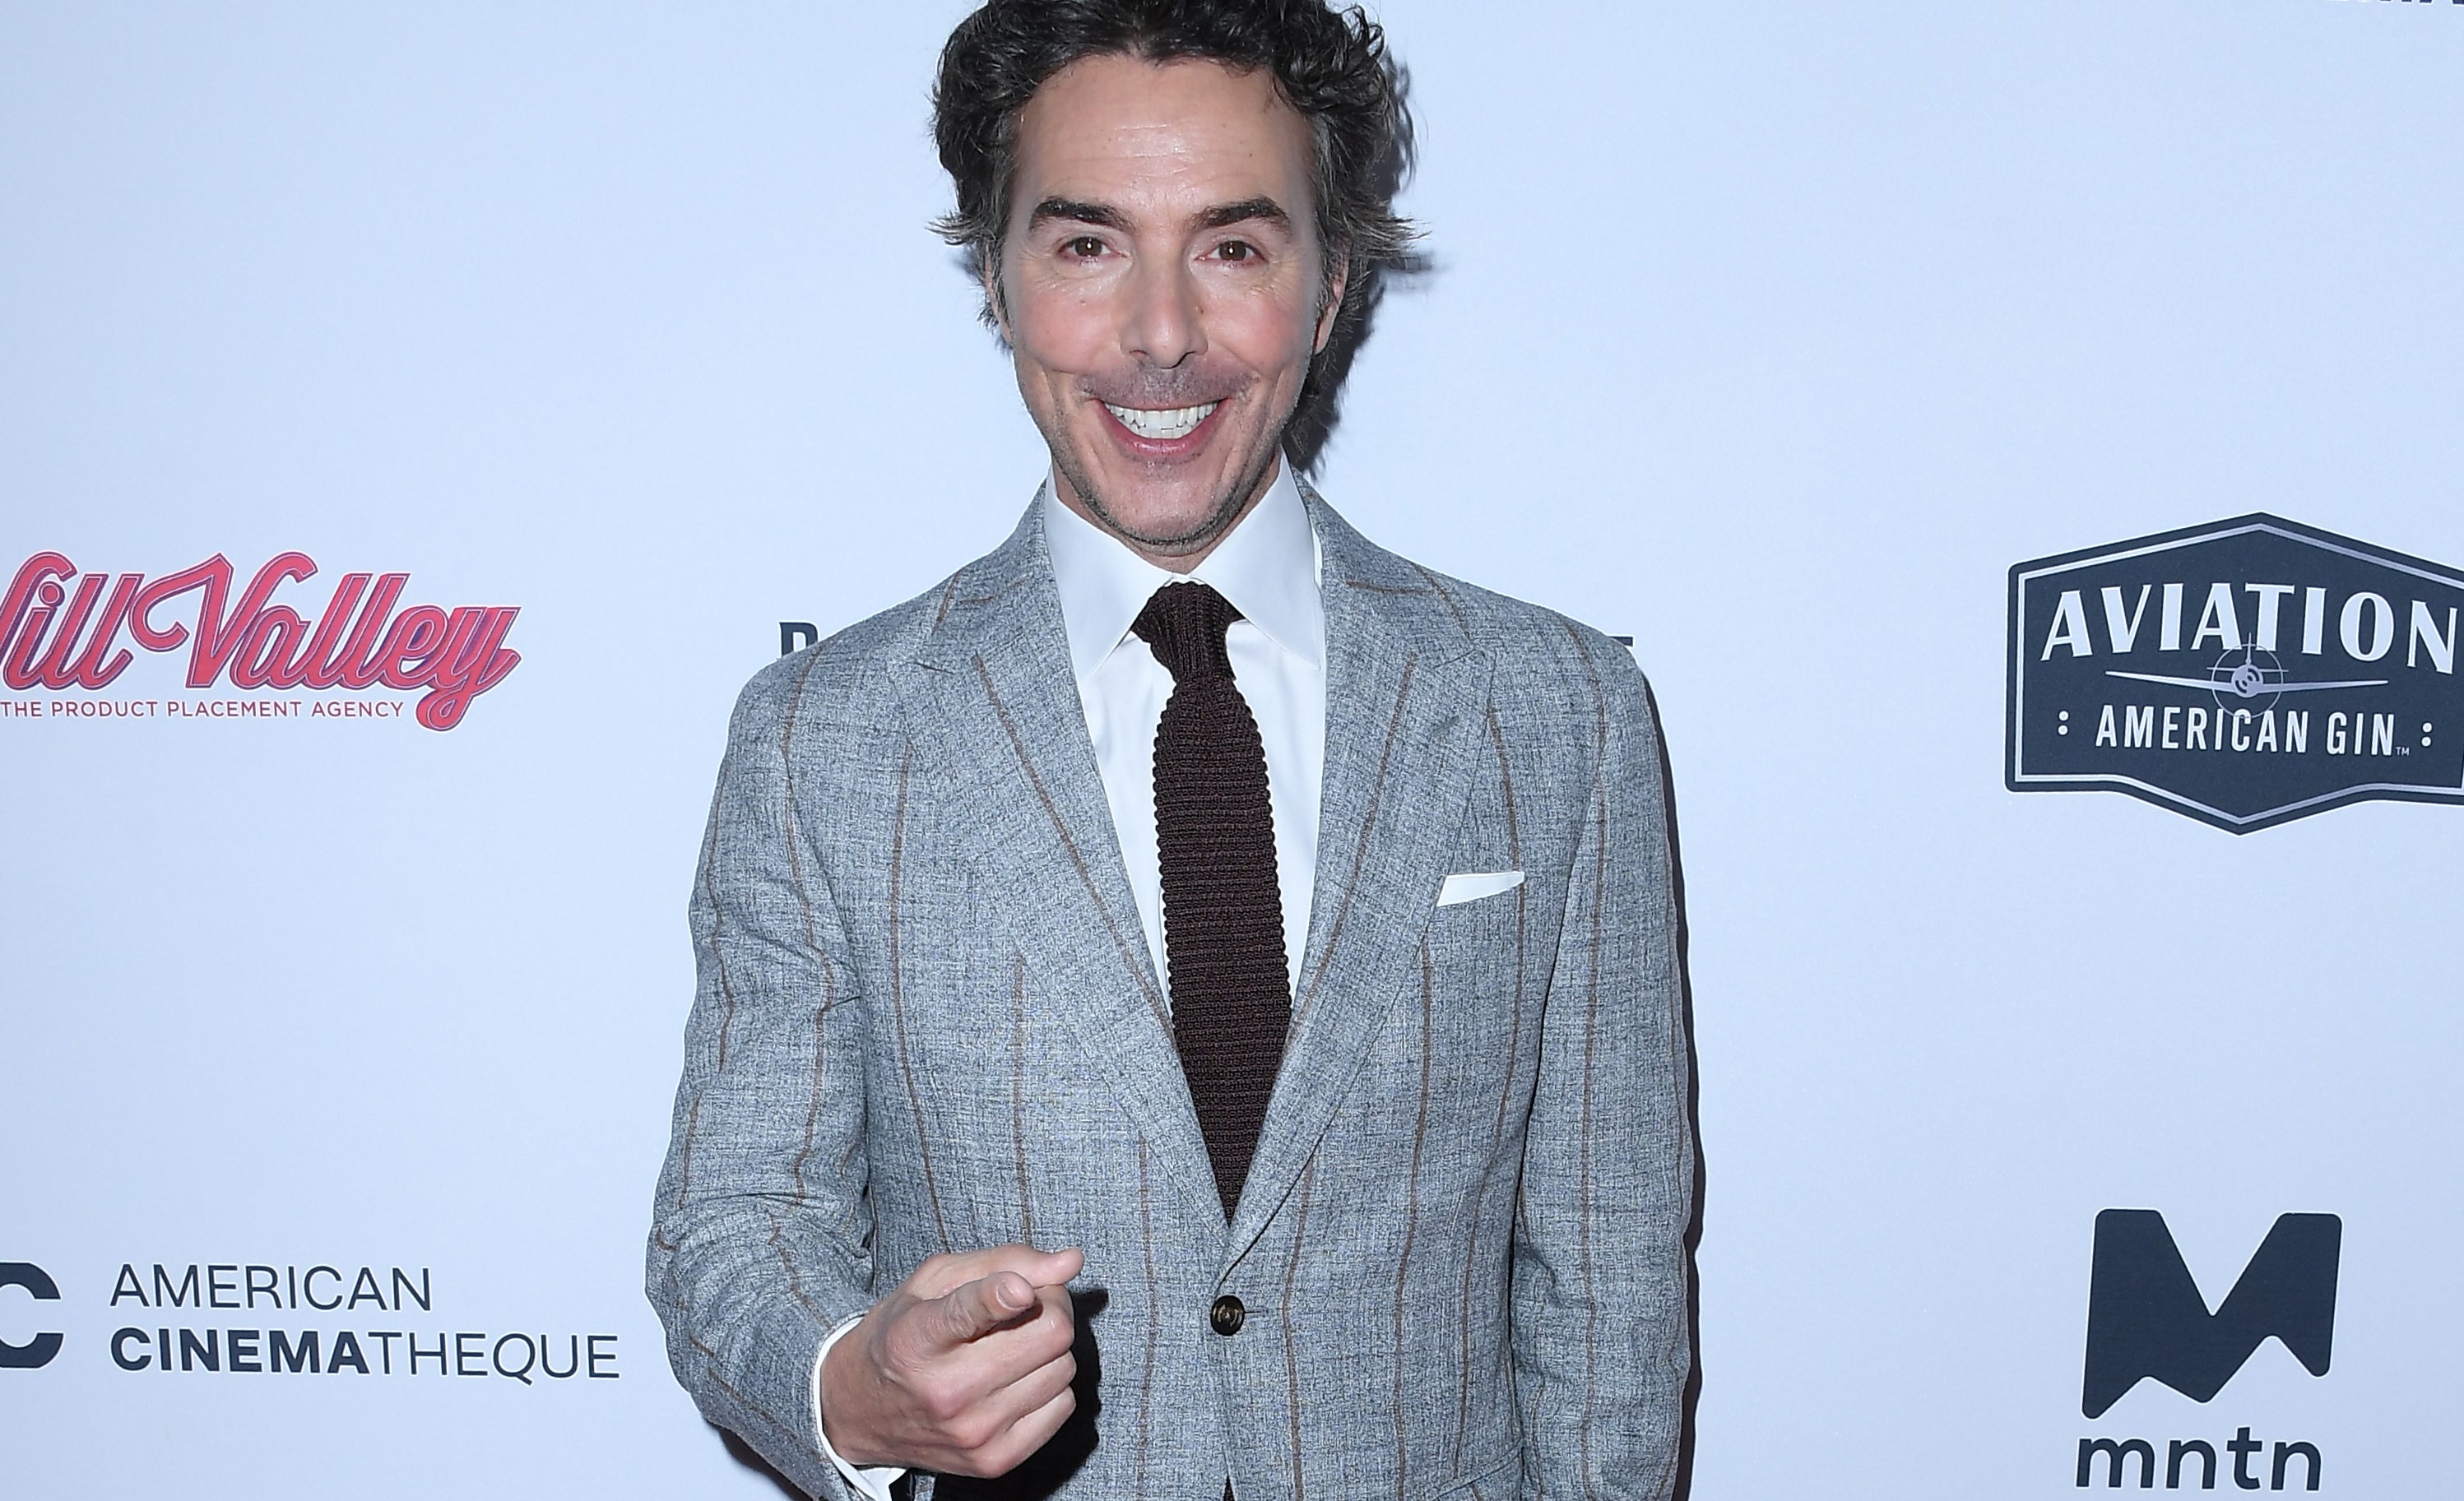 Shawn Levy pointing and smiling at the camera